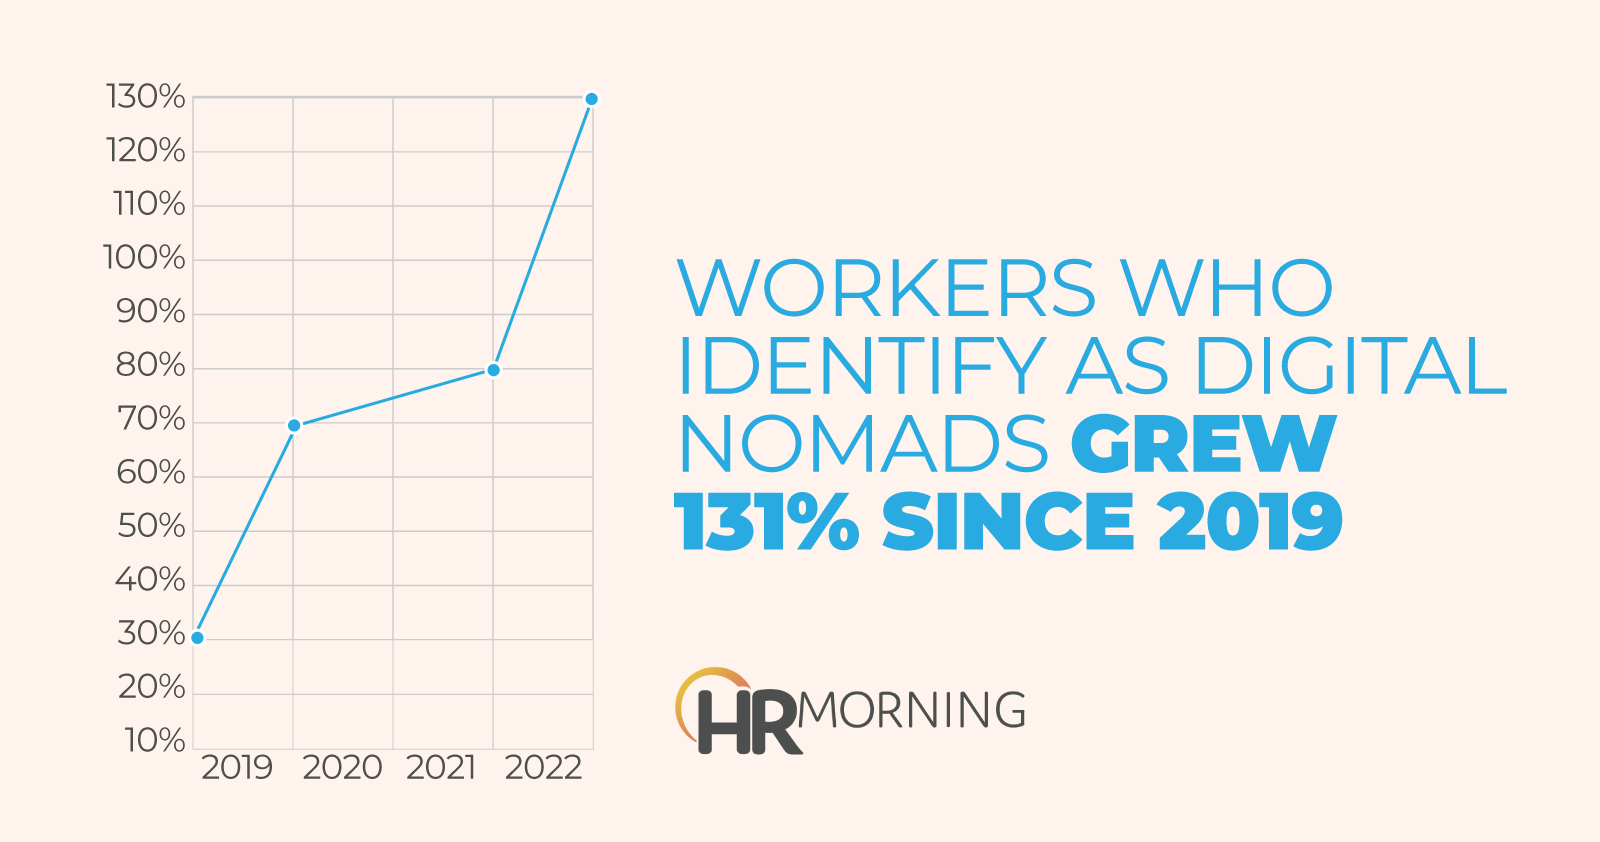 Workers Who Identify As Digital Nomads Grew3 1% Since 2019